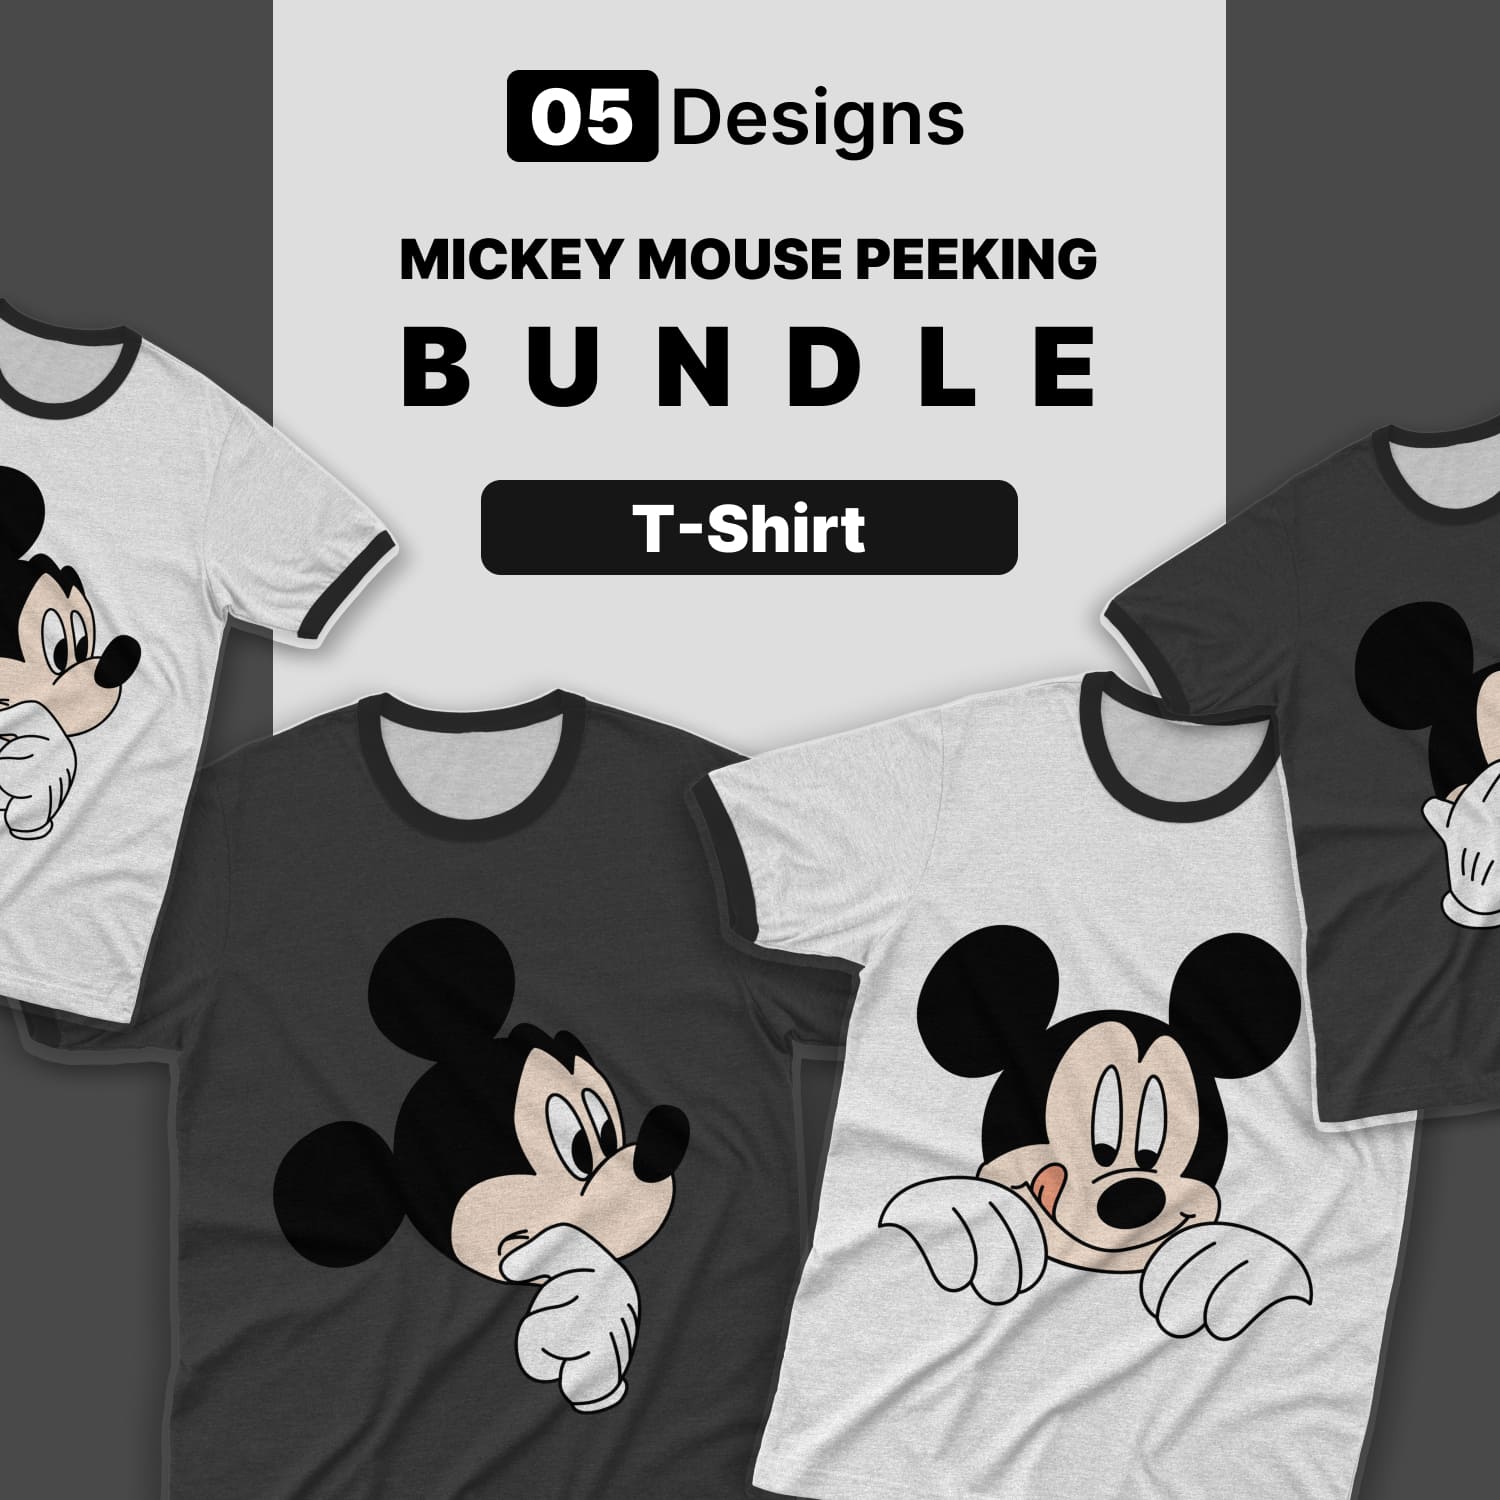 Mickey mouse peeking svg - main image preview.